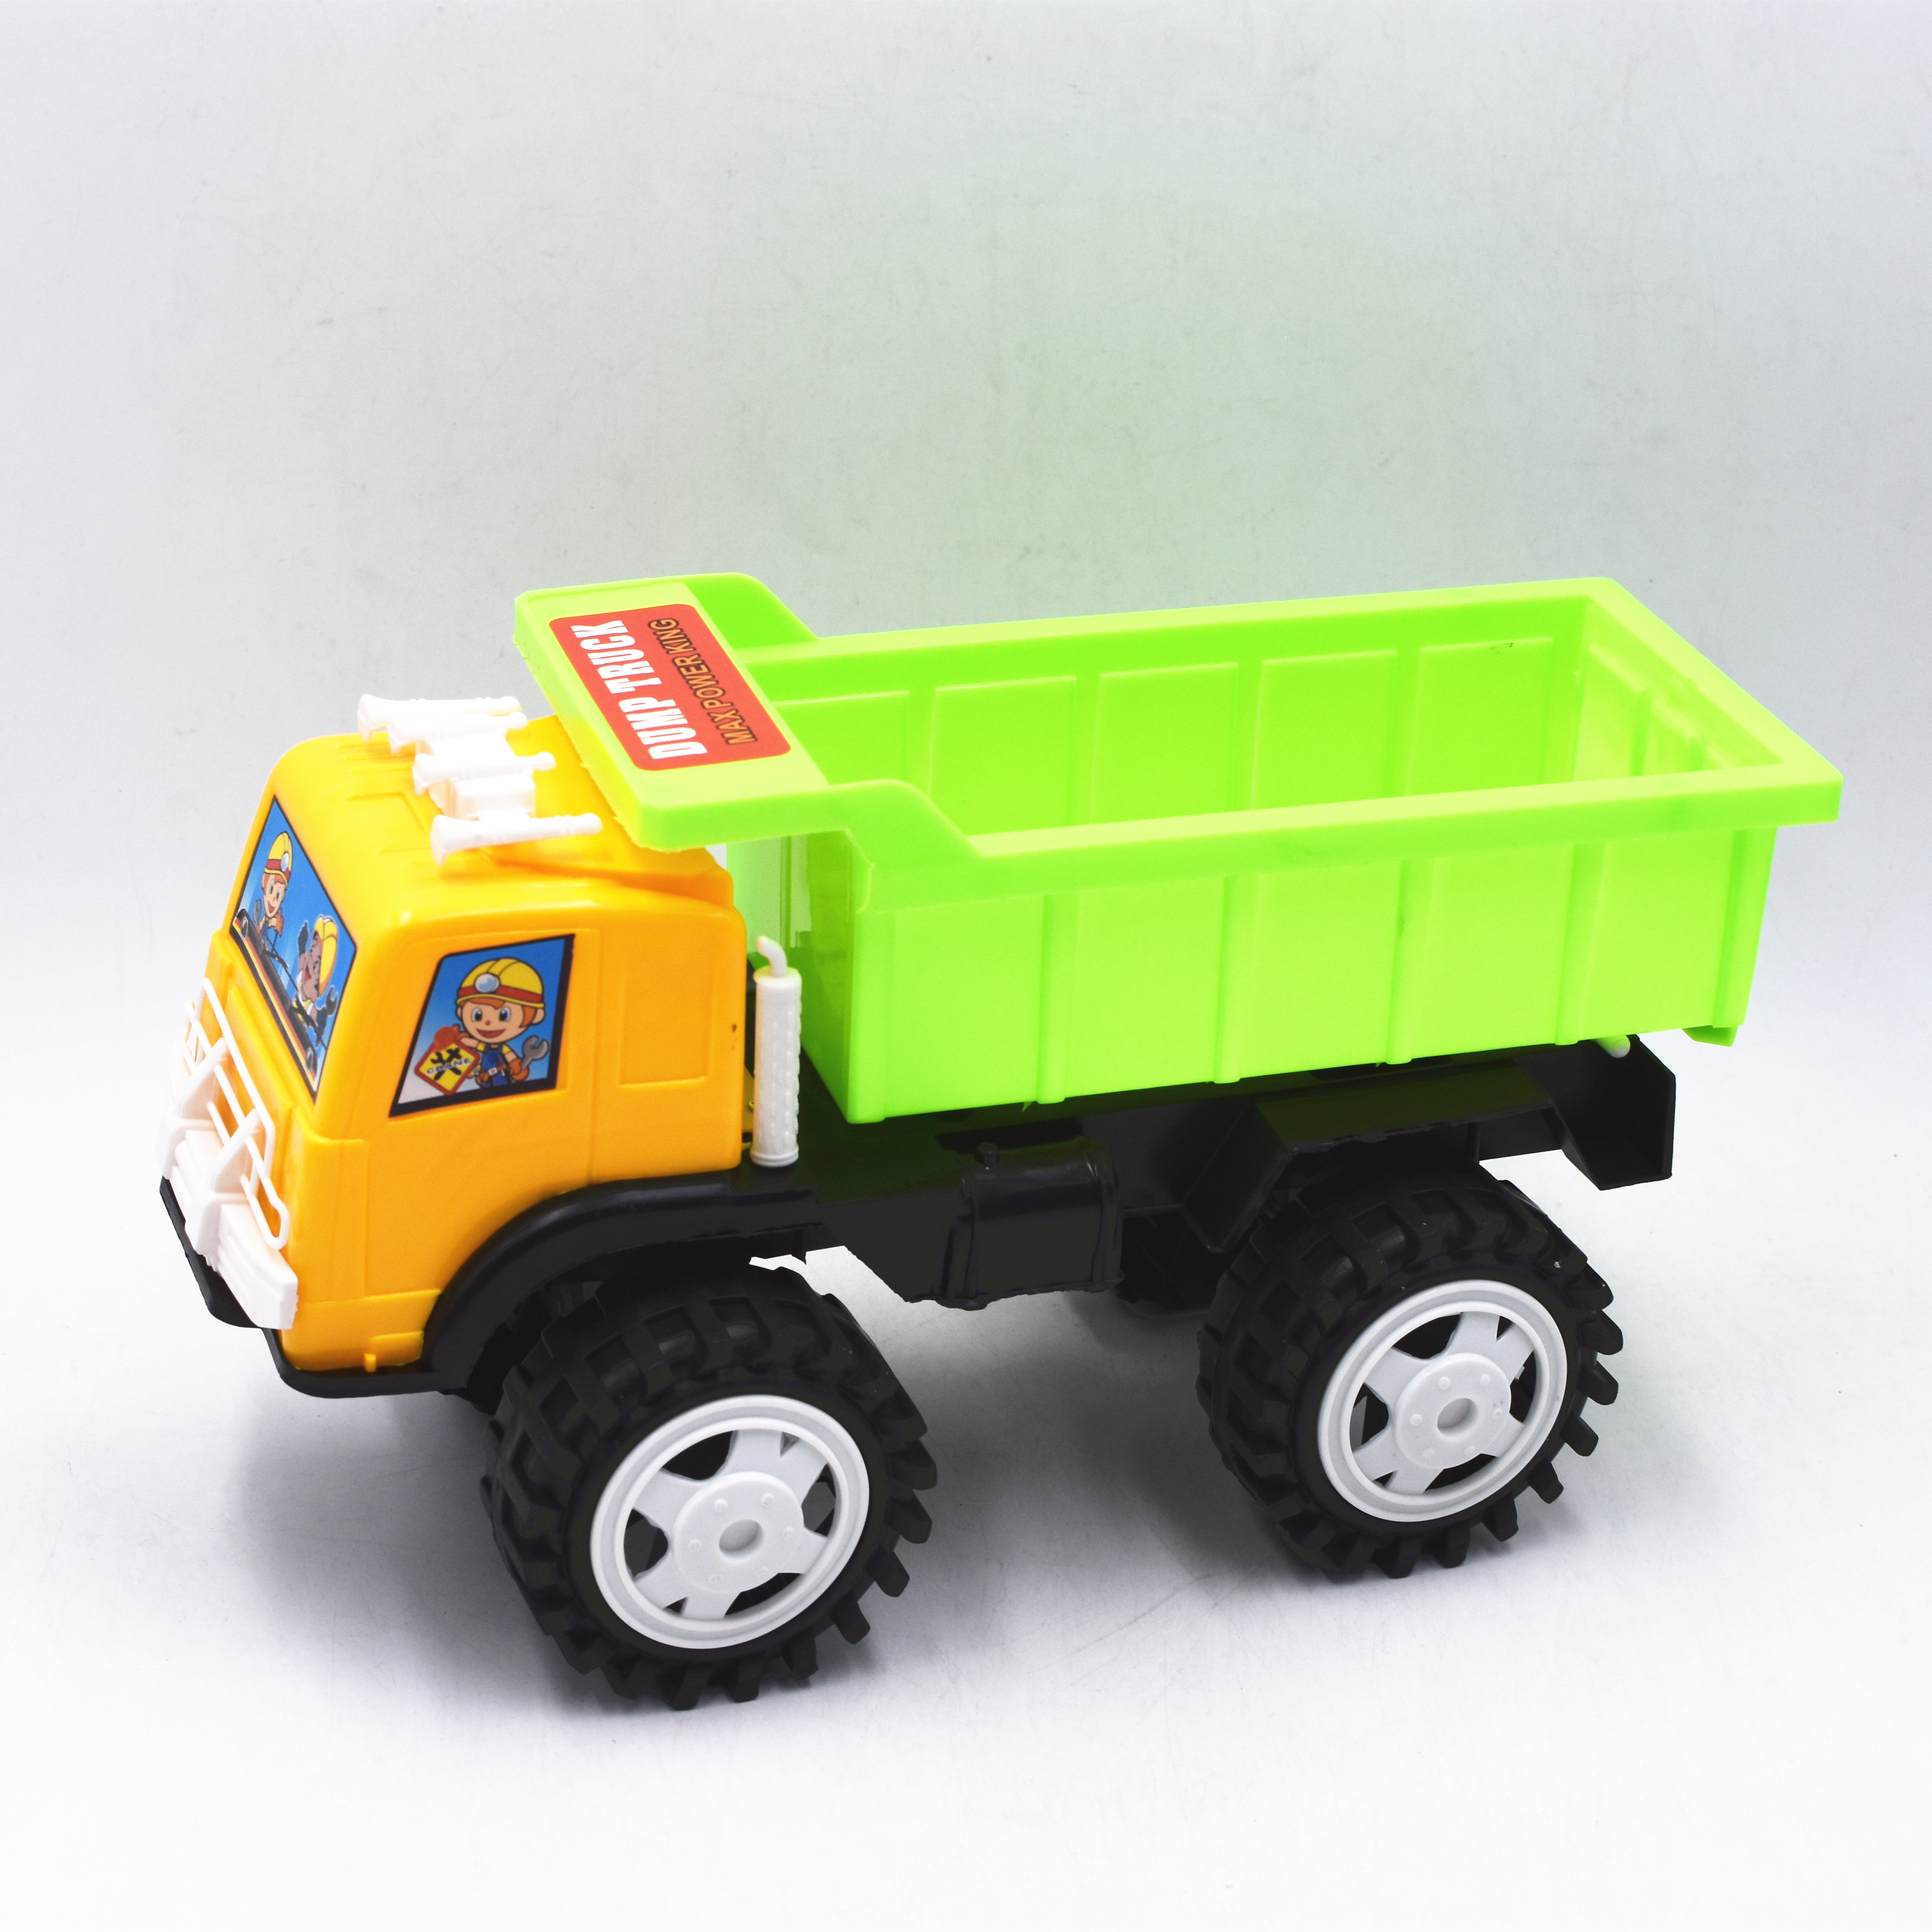 FREE WHEEL TRUCK TOY LY1728